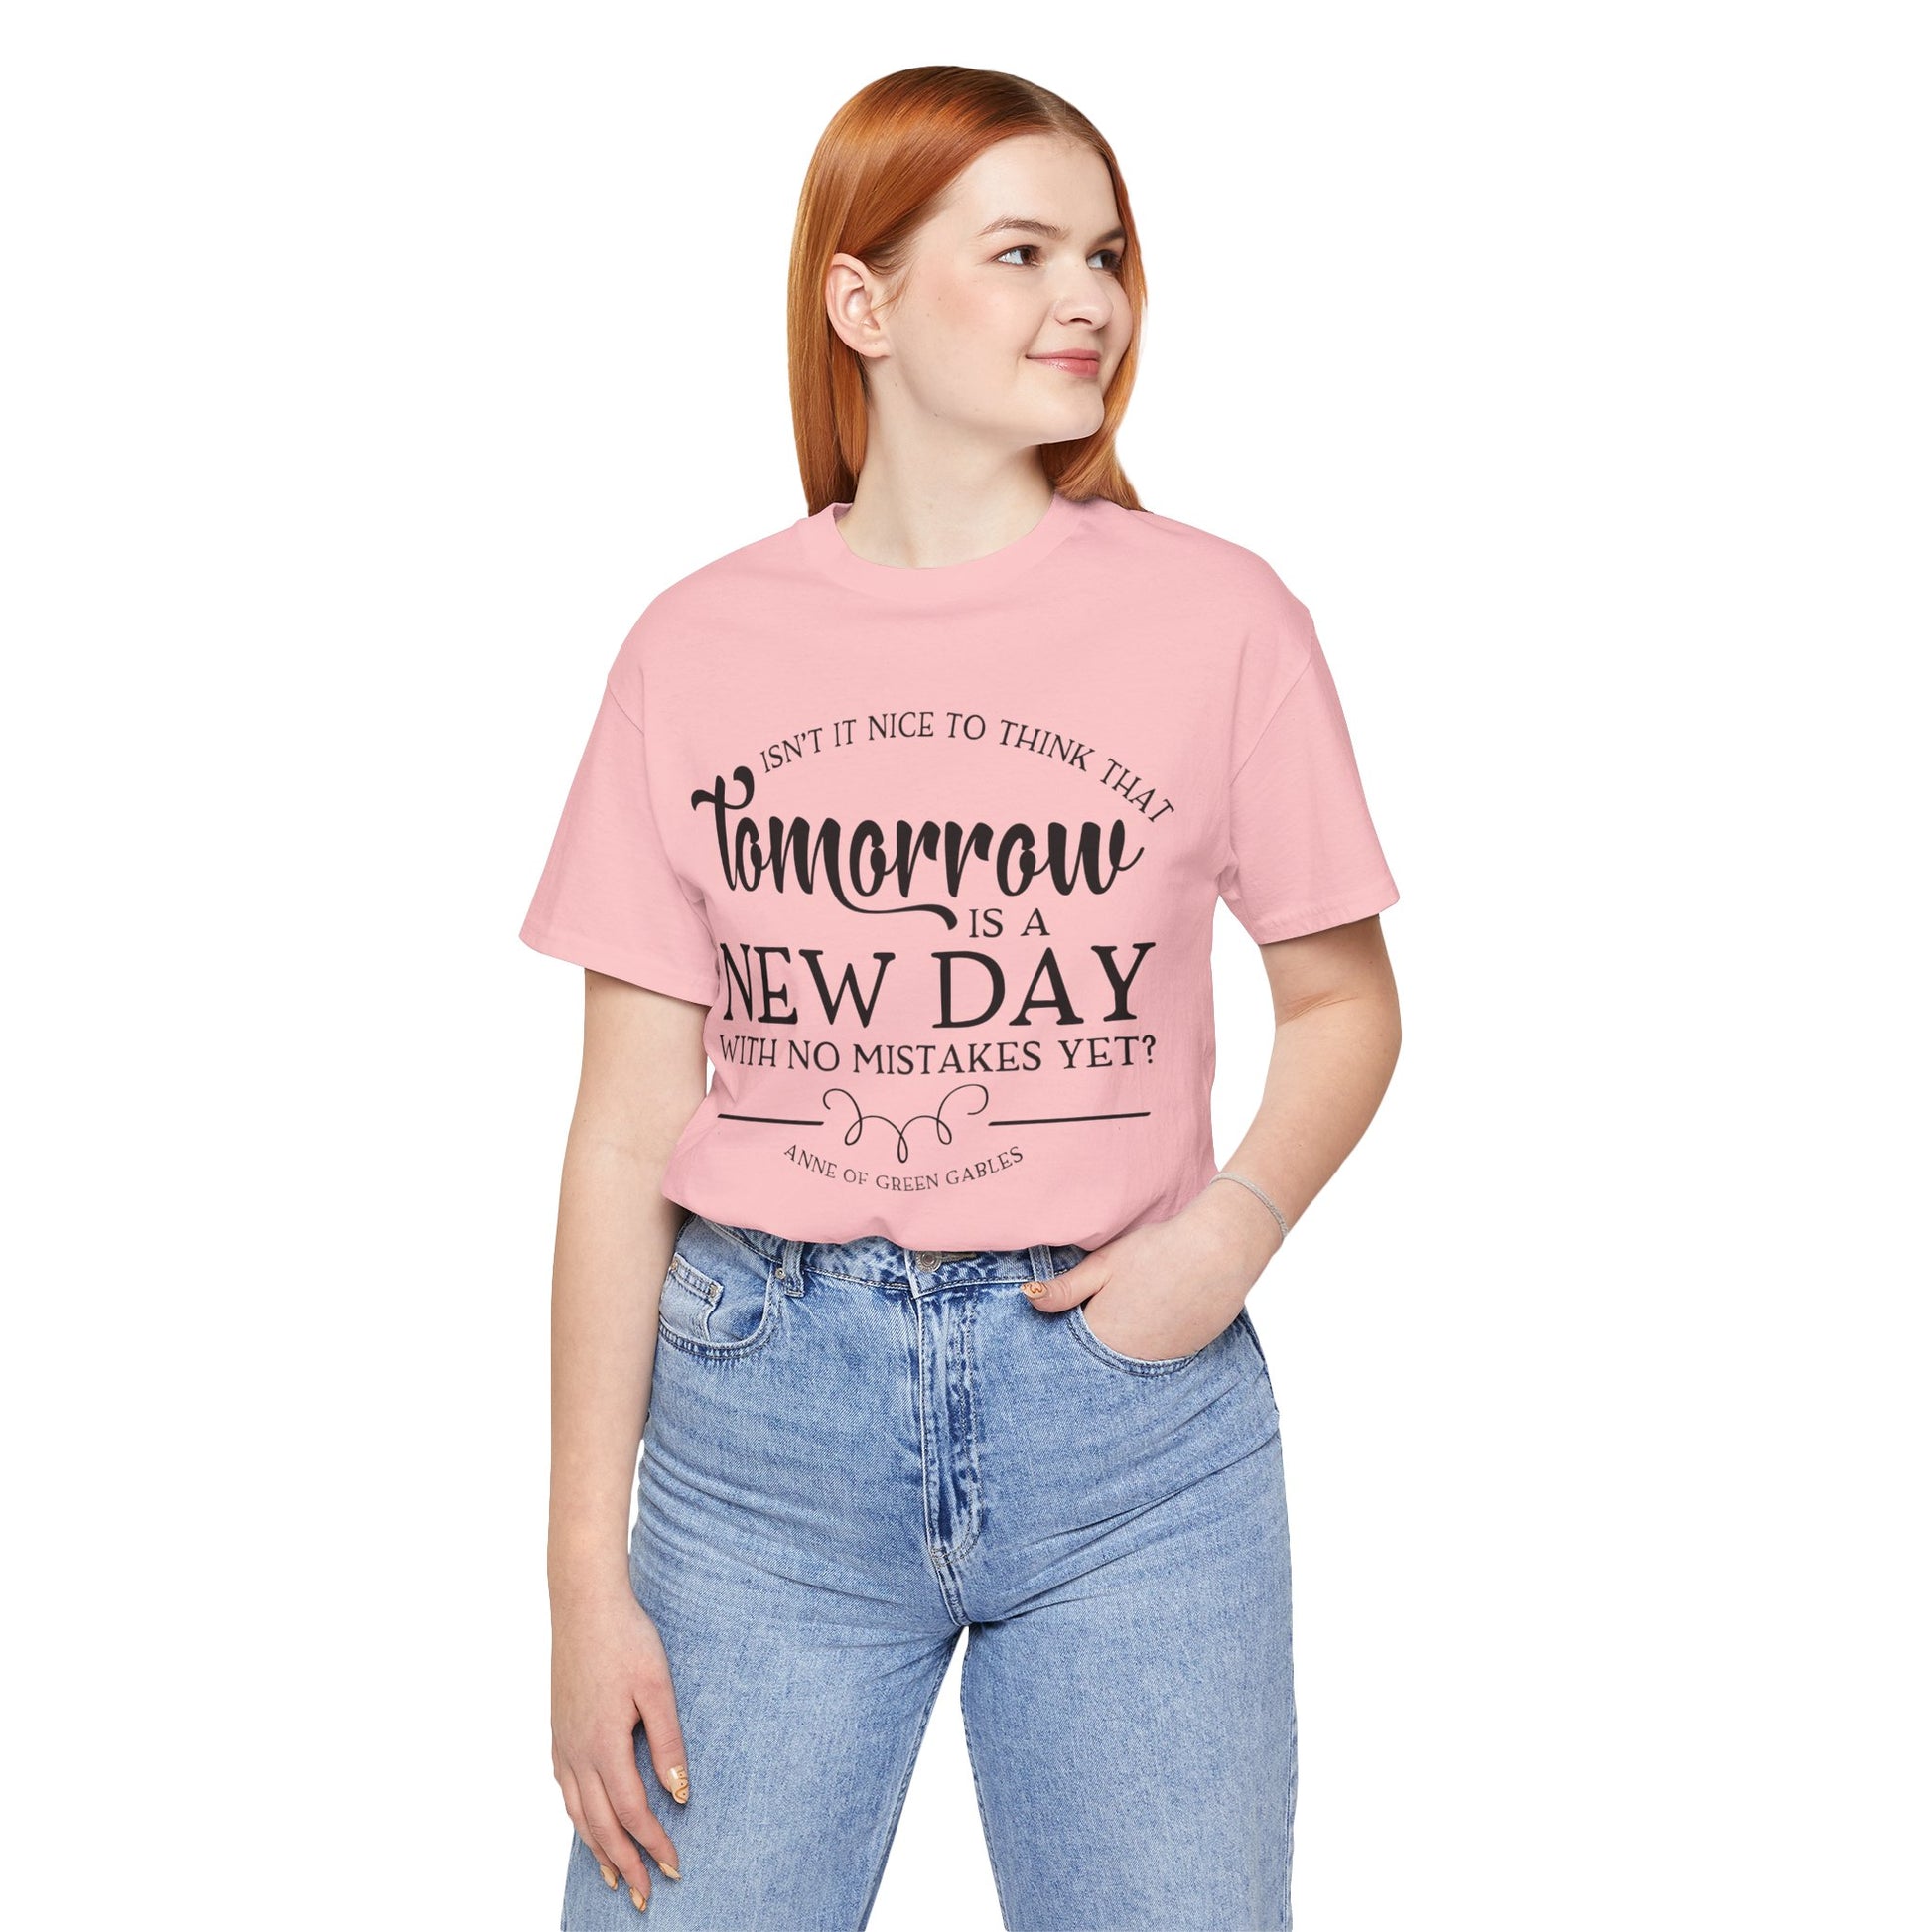 anne of green gables quote shirt